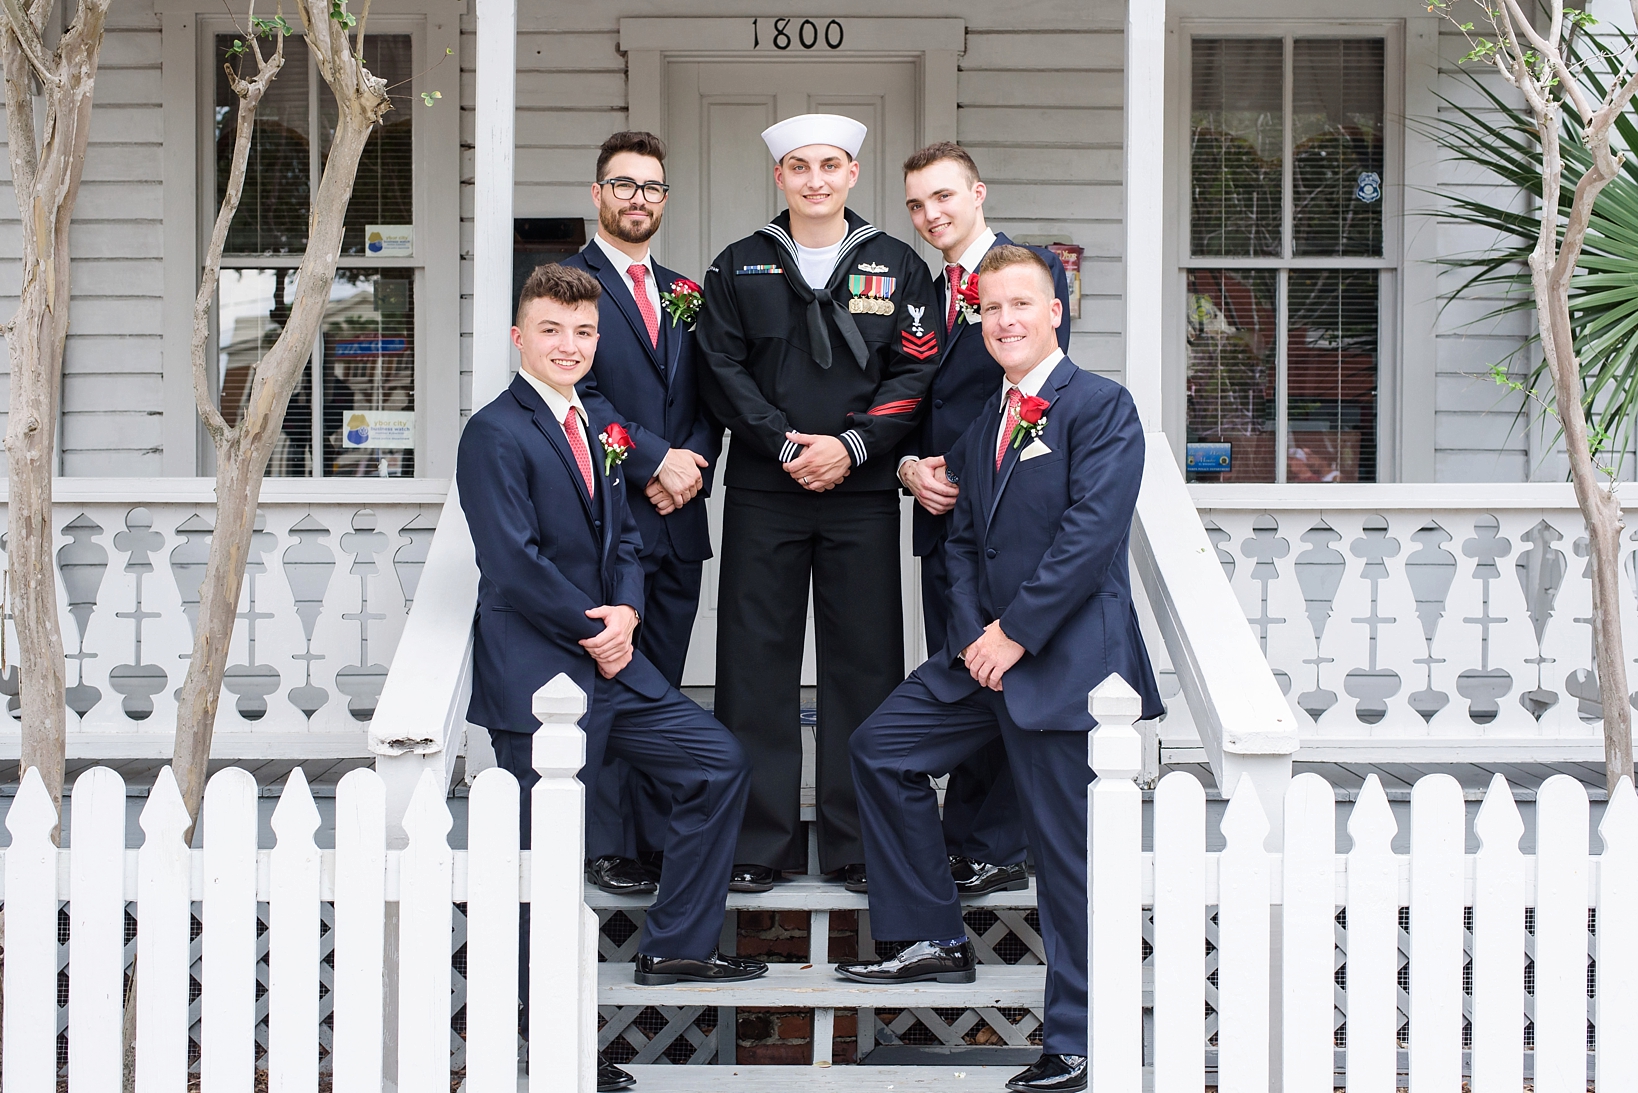 The groom and his groomsmen